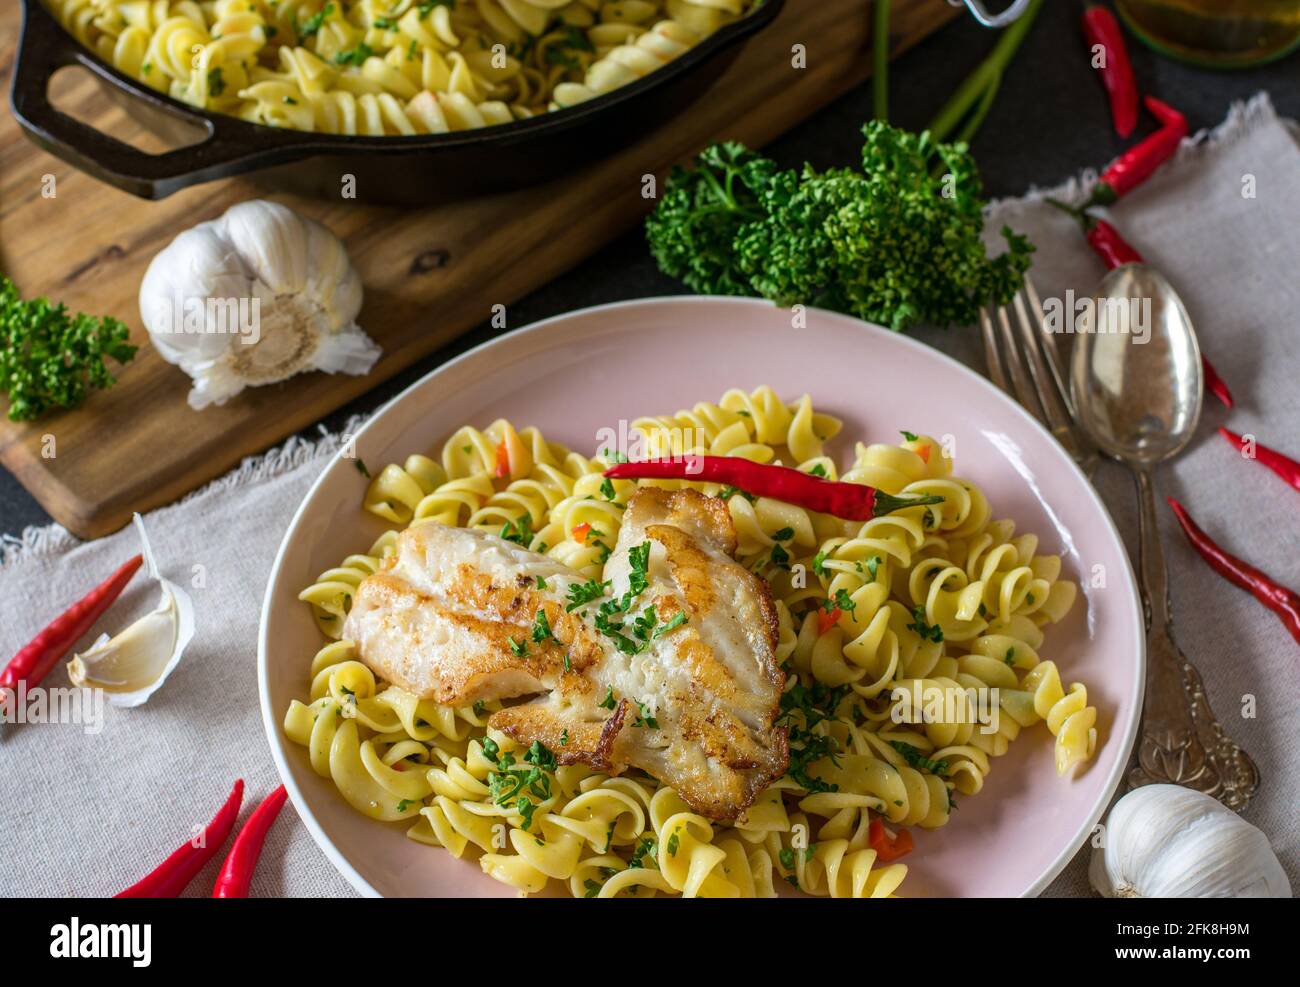 Healthy italian dish with pasta aglio e olio and fried fish served on plate on rustic kitchen table background from above Stock Photo